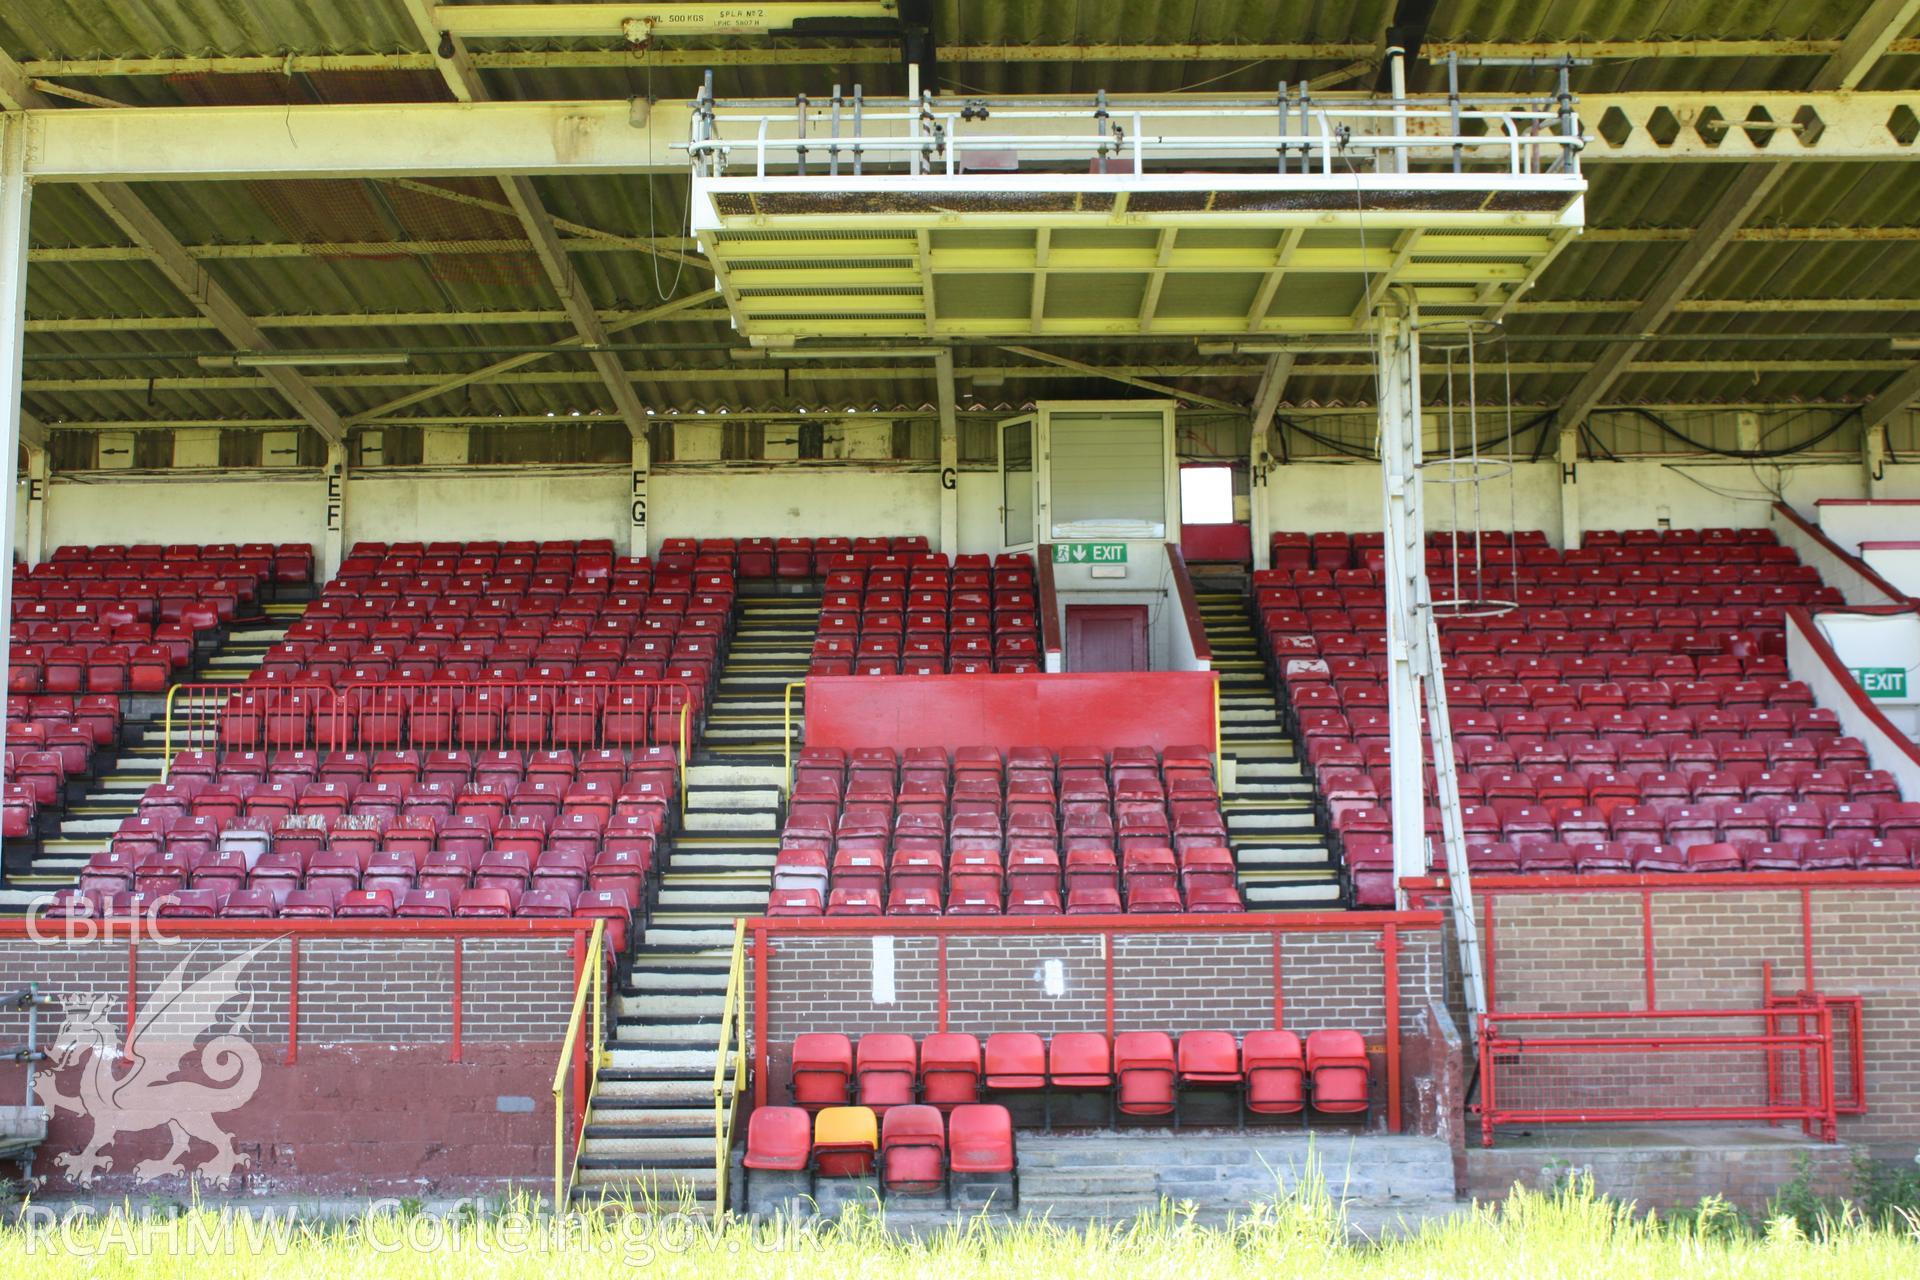 Grand (South) Stand, seating areas E-H